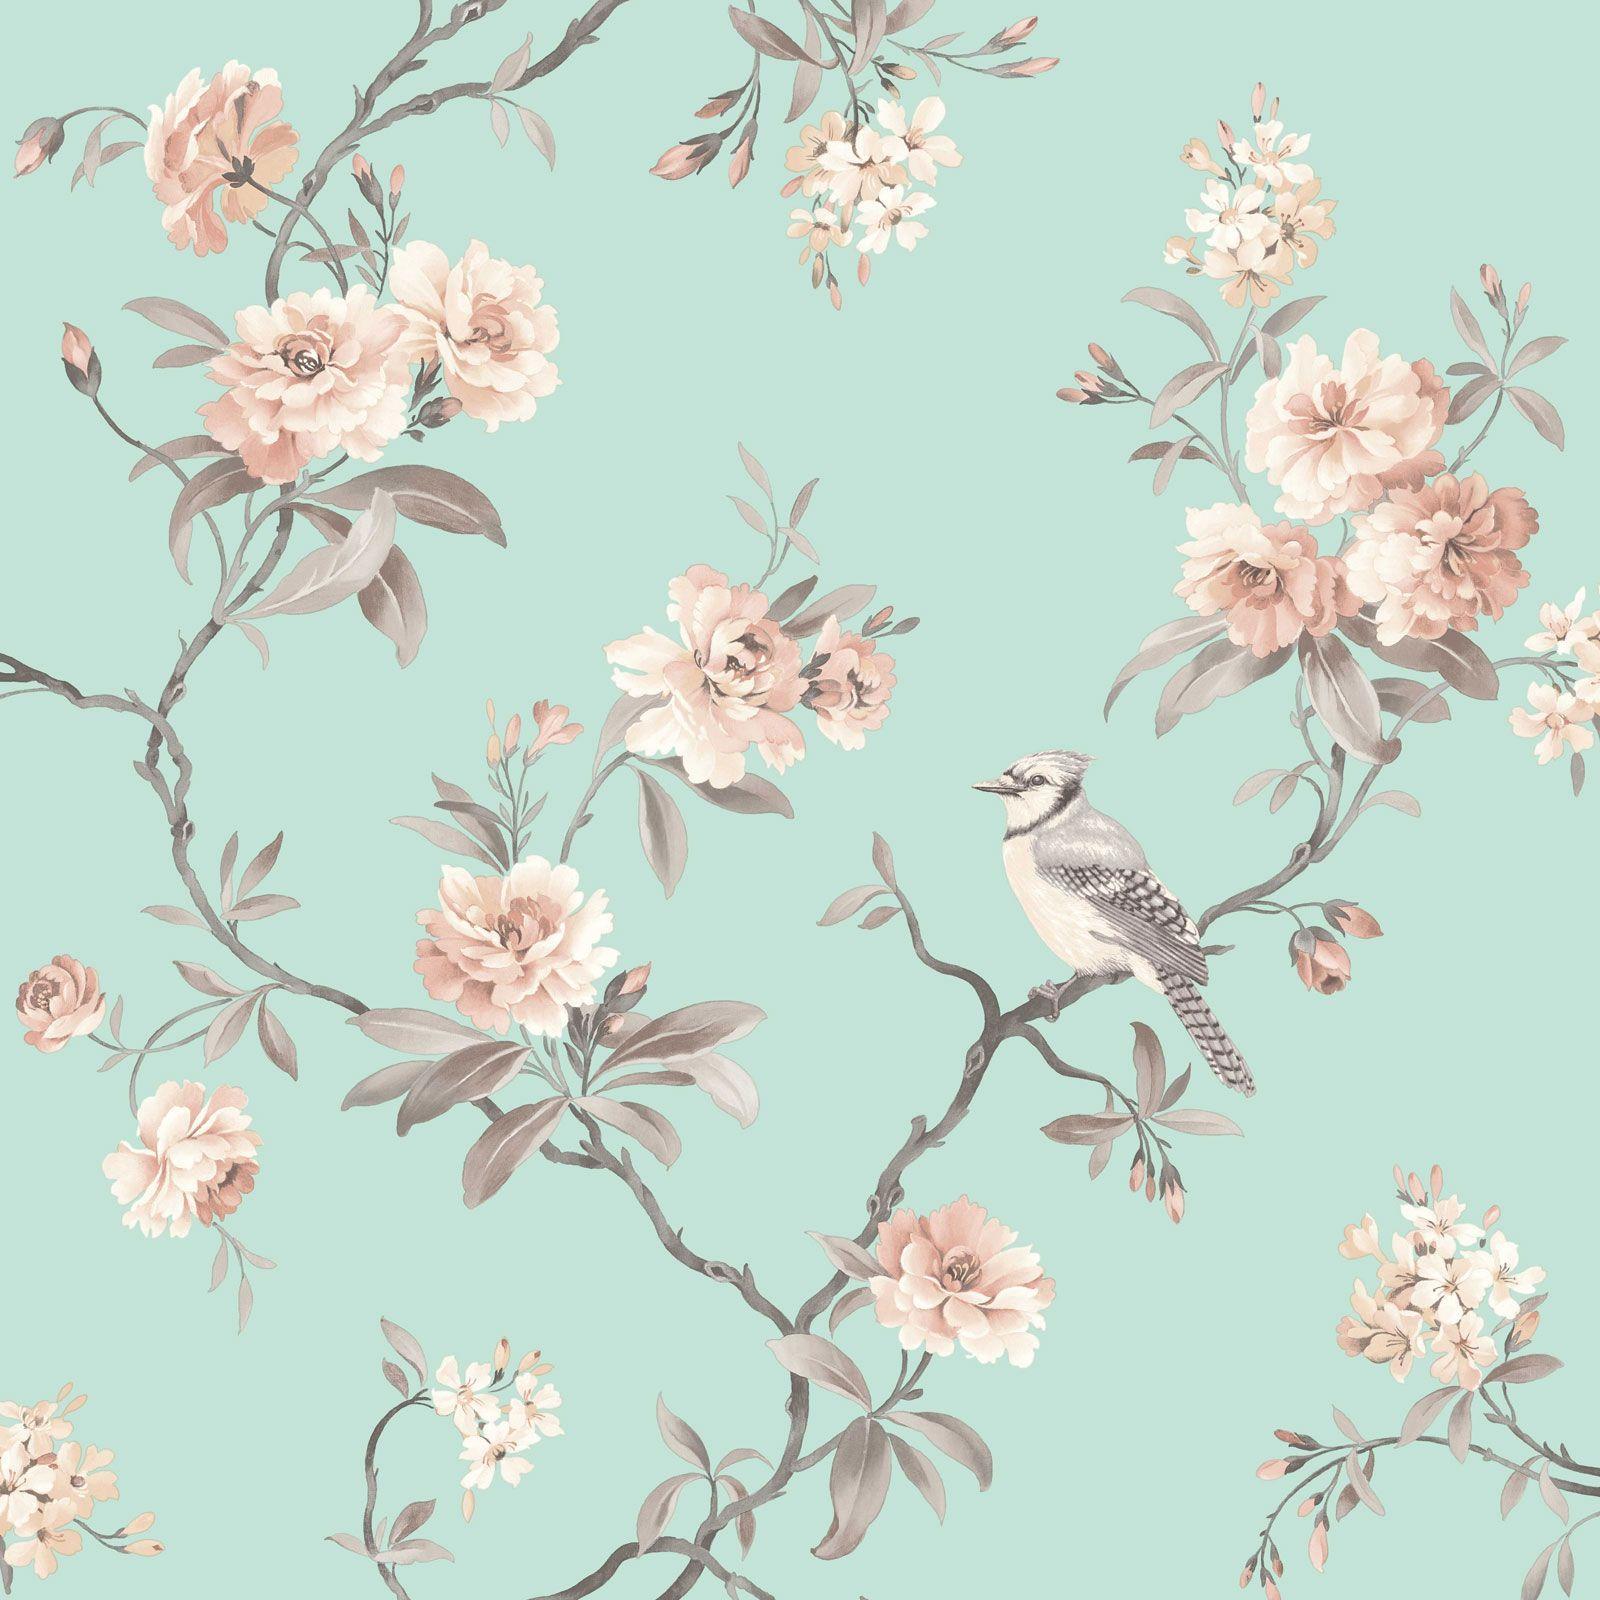 BEAUTIFUL BIRDS THEMED WALLPAPERS IN VARIOUS DESIGNS FEATURE WALL